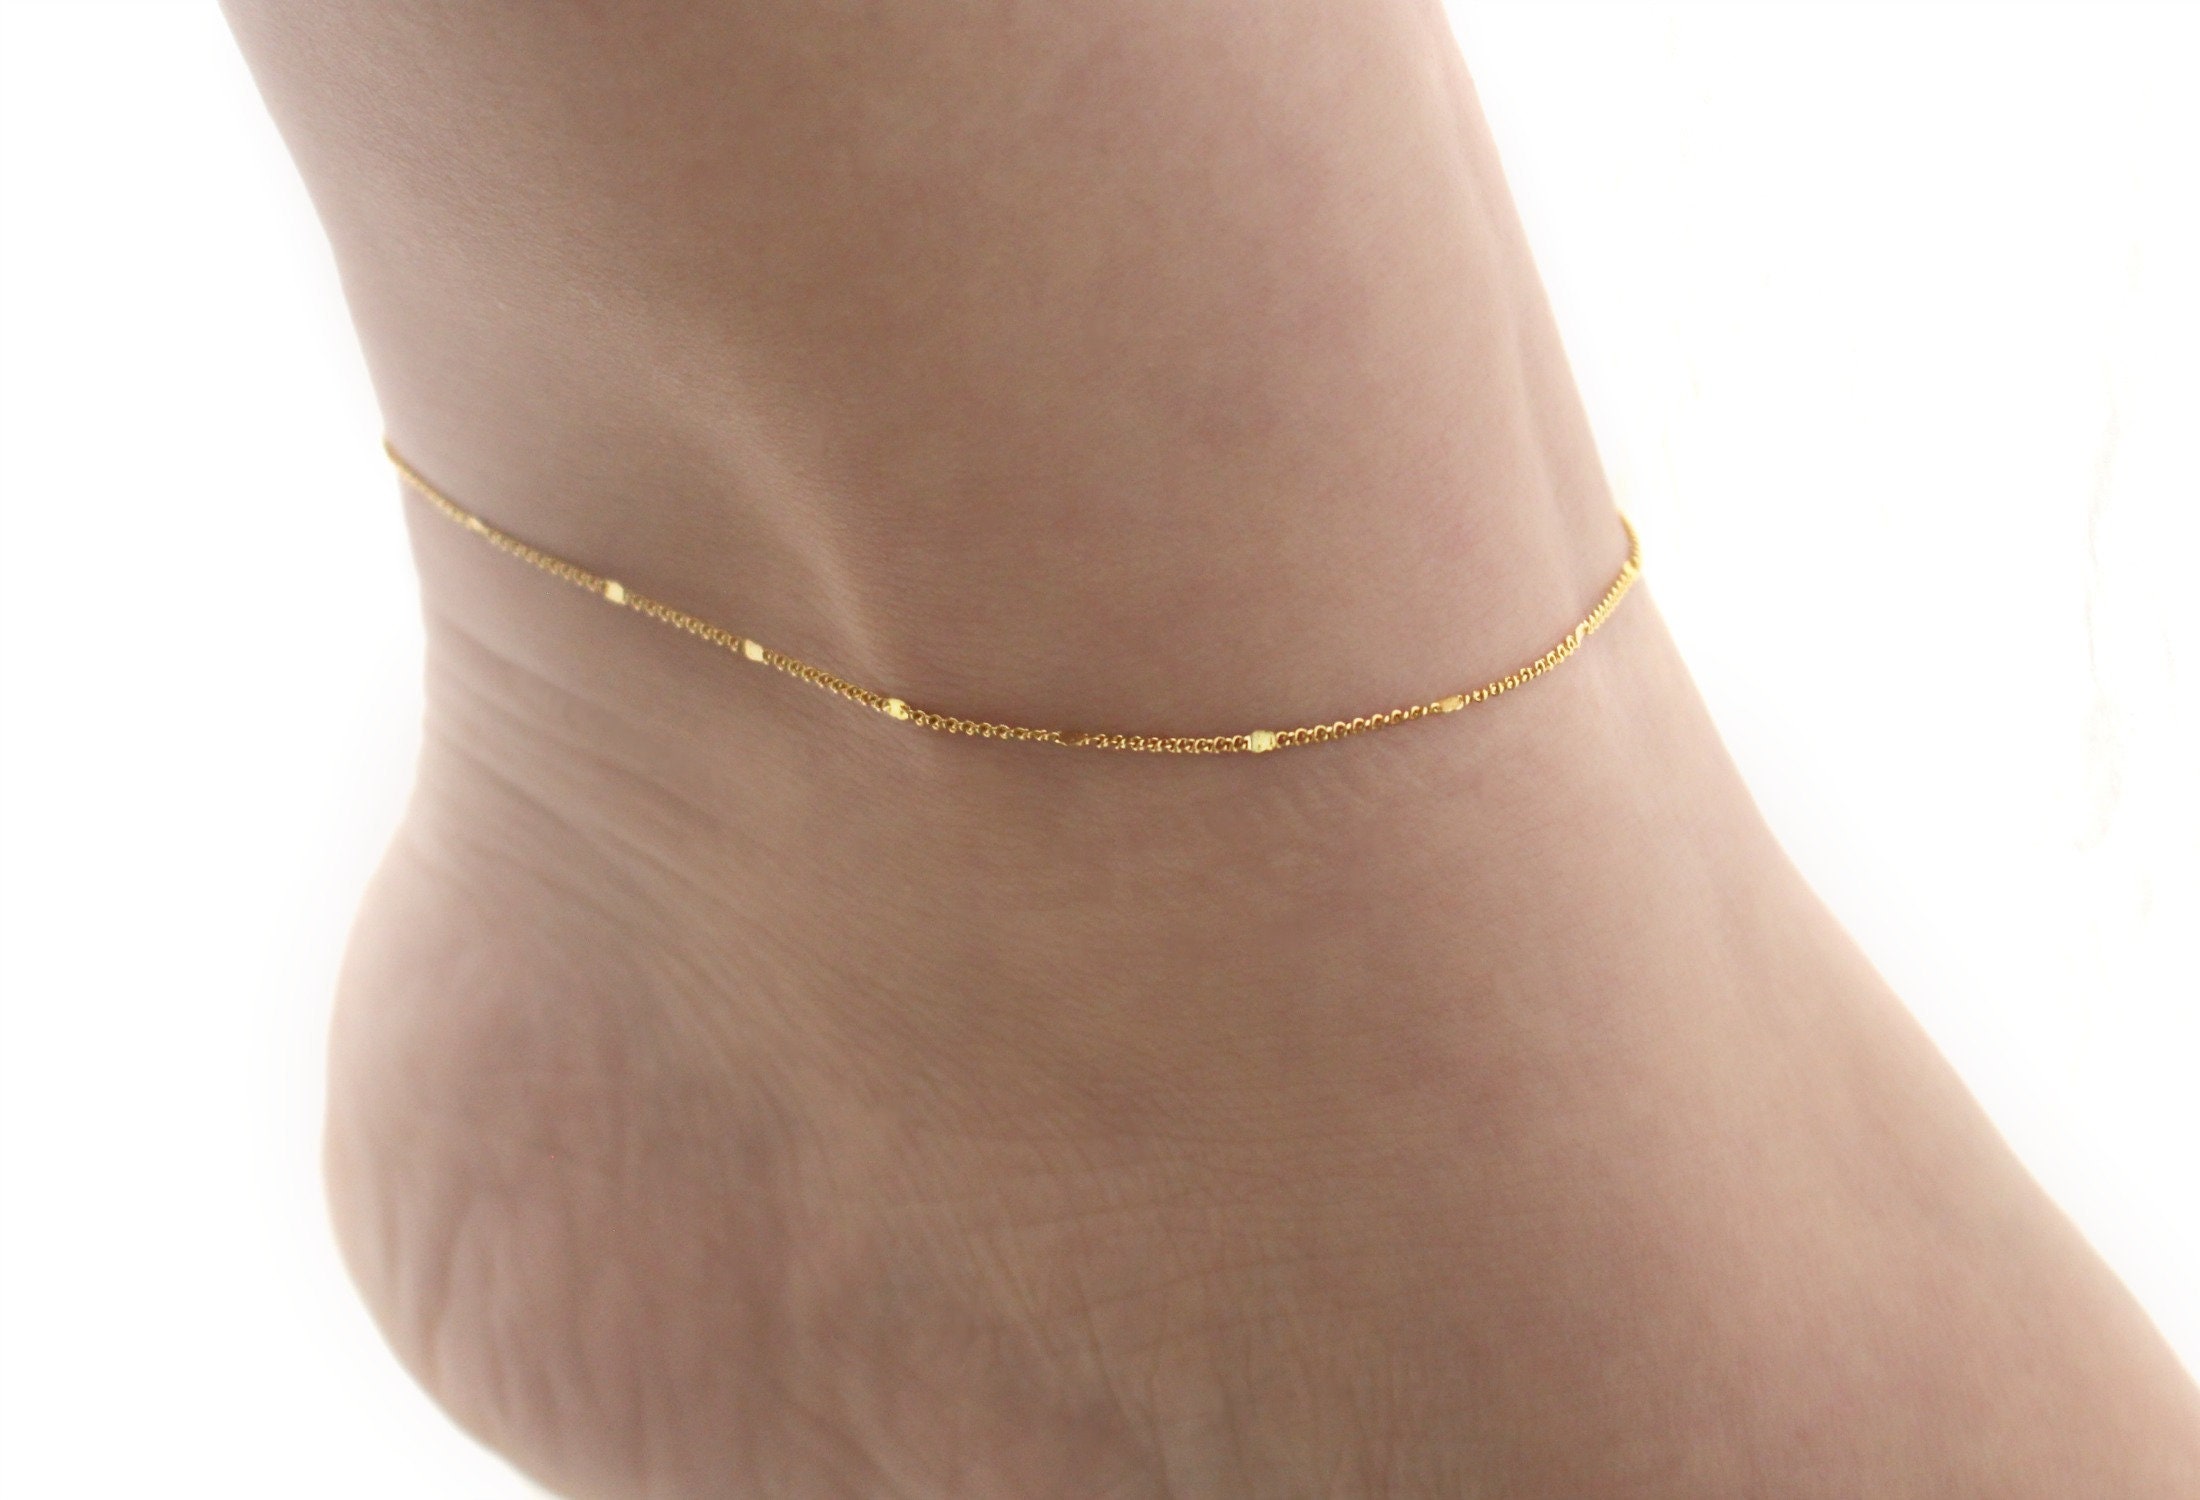 Gold Double Layers Anklet Gold Beaded Anklet Jewellery Body Jewellery Anklets Layering Anklet Gold Herringbone Anklet Anklet Bracelet Layered Anklet 18K Gold Anklets 